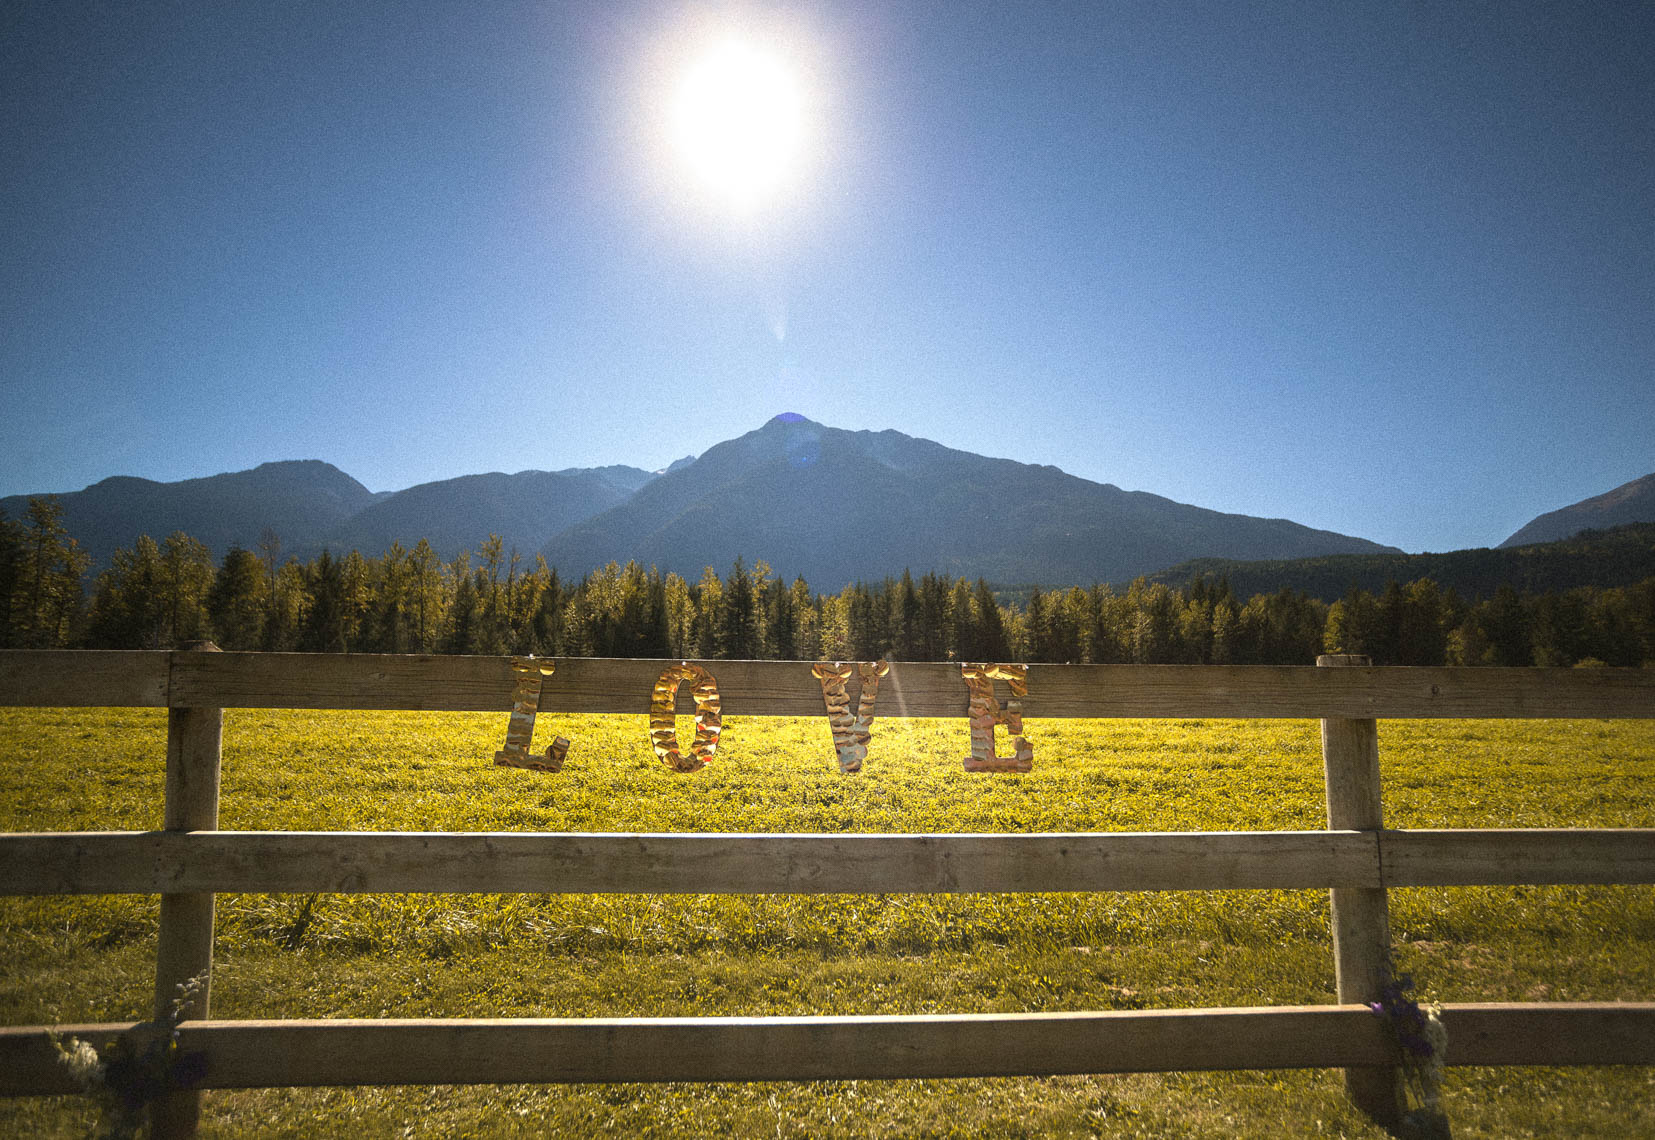 Love sign wedding decor on rustic wooden fence at whistler farm wedding.